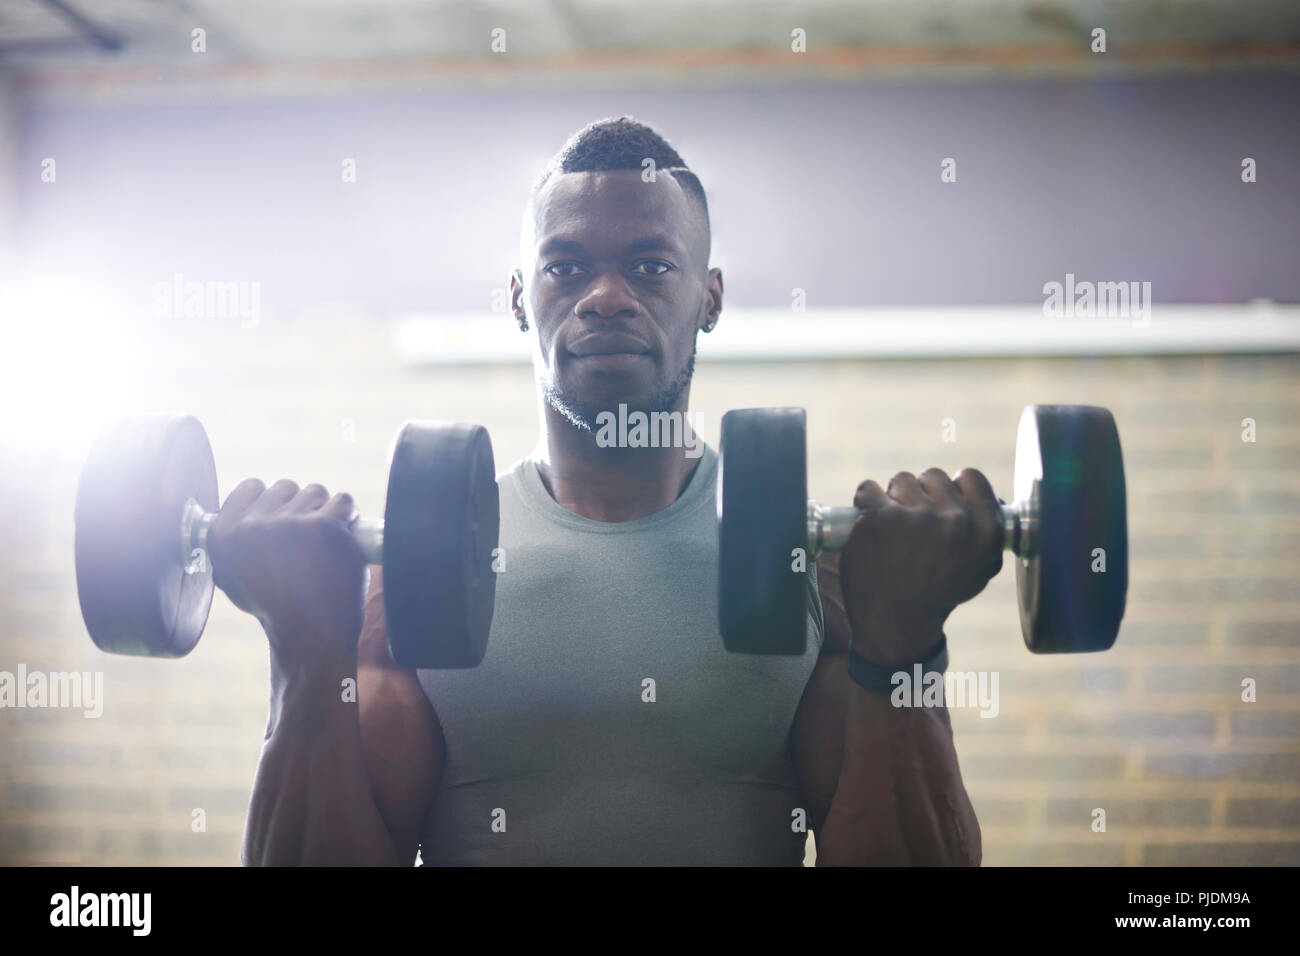 Man lifting dumbbells in gym Stock Photo